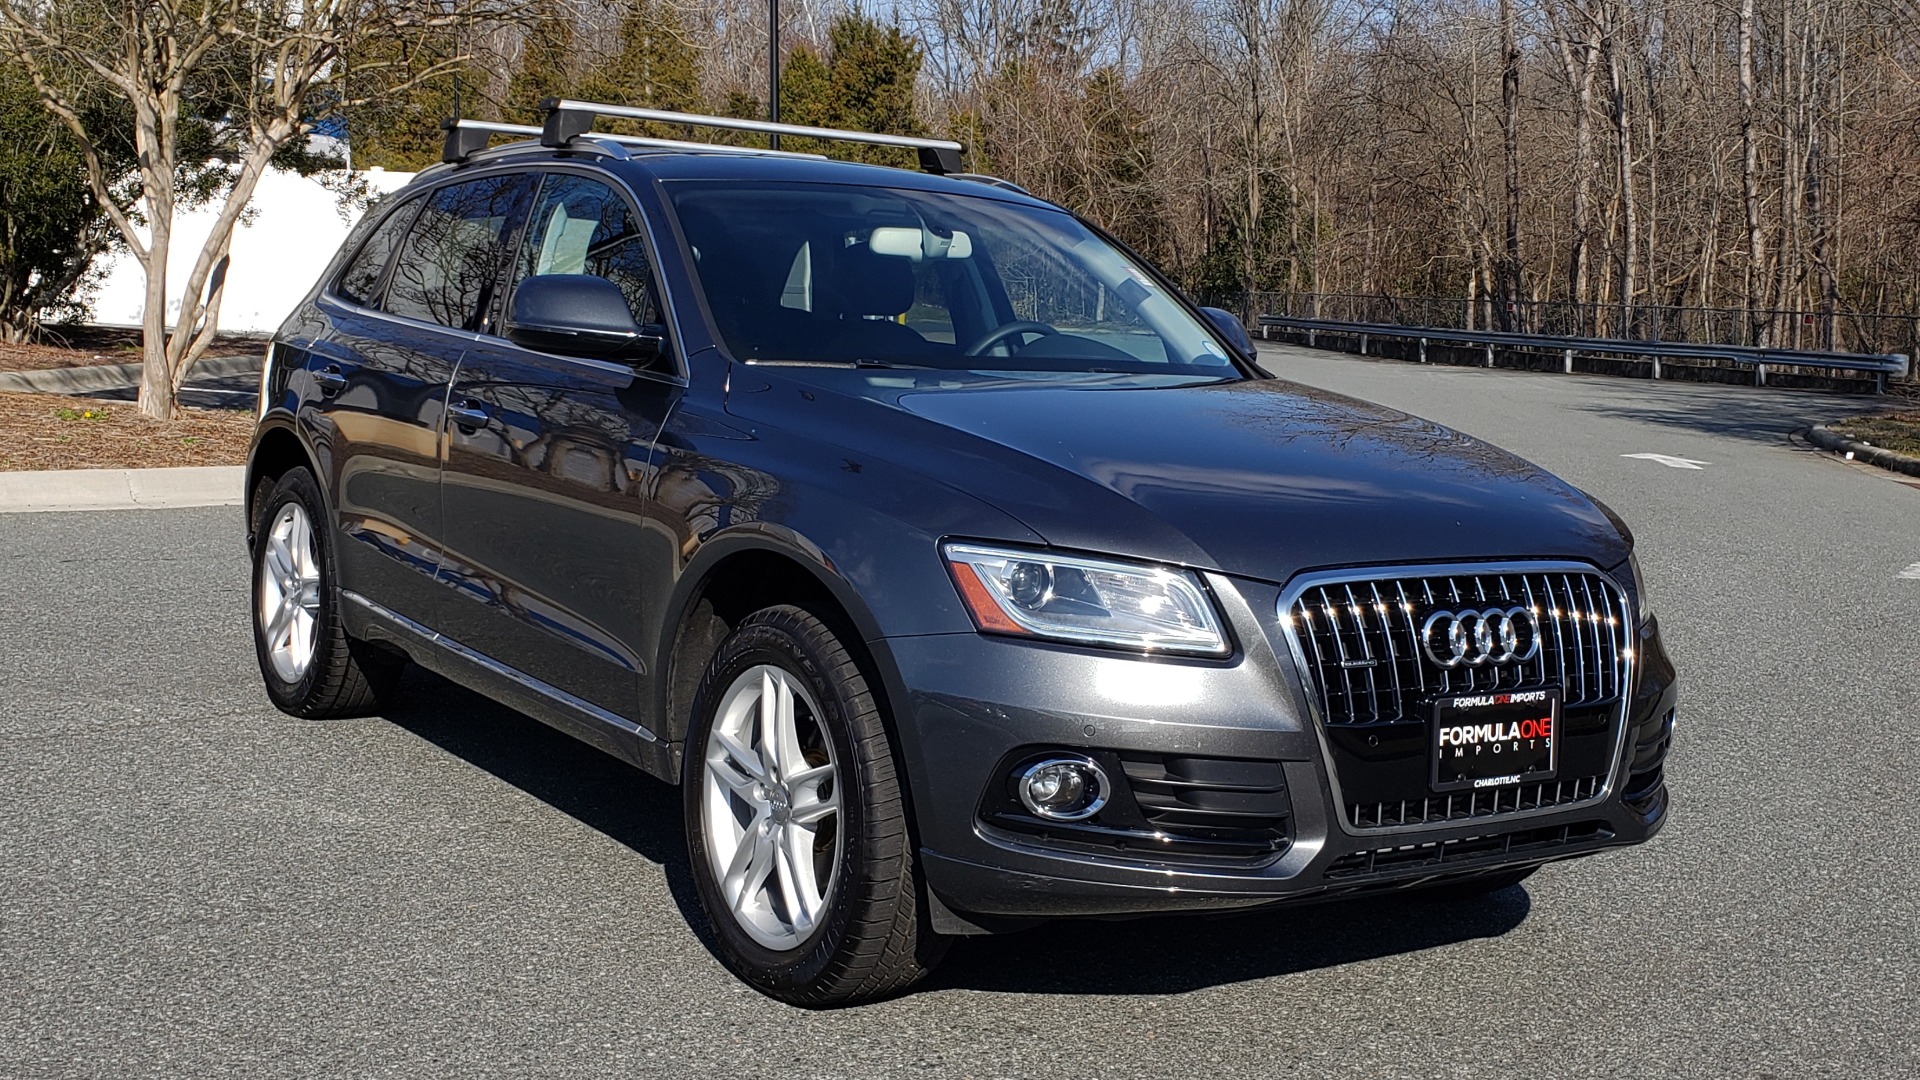 Used 2017 Audi Q5 PREMIUM PLUS / TECH / NAV / PANO / REARVIEW / B&O SND for sale Sold at Formula Imports in Charlotte NC 28227 4